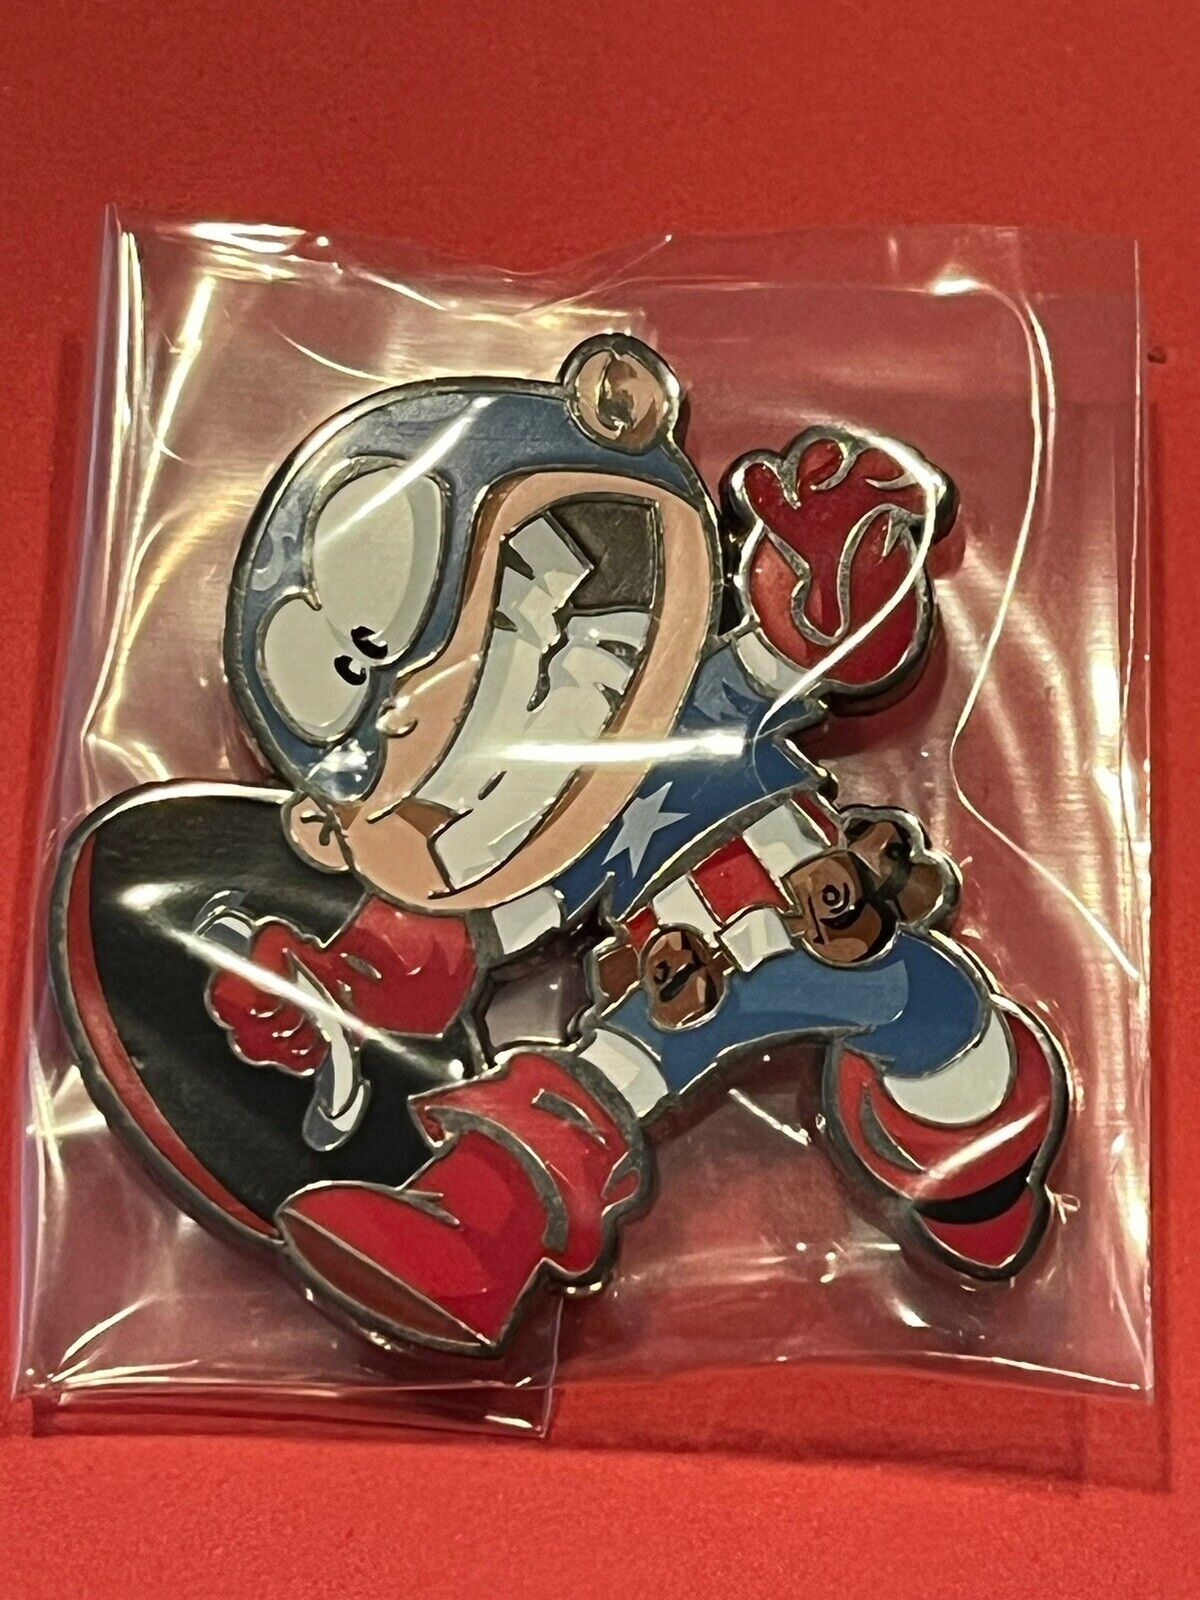 NYCC 2021 Skottie Young Marvel Avengers Captain America Pin